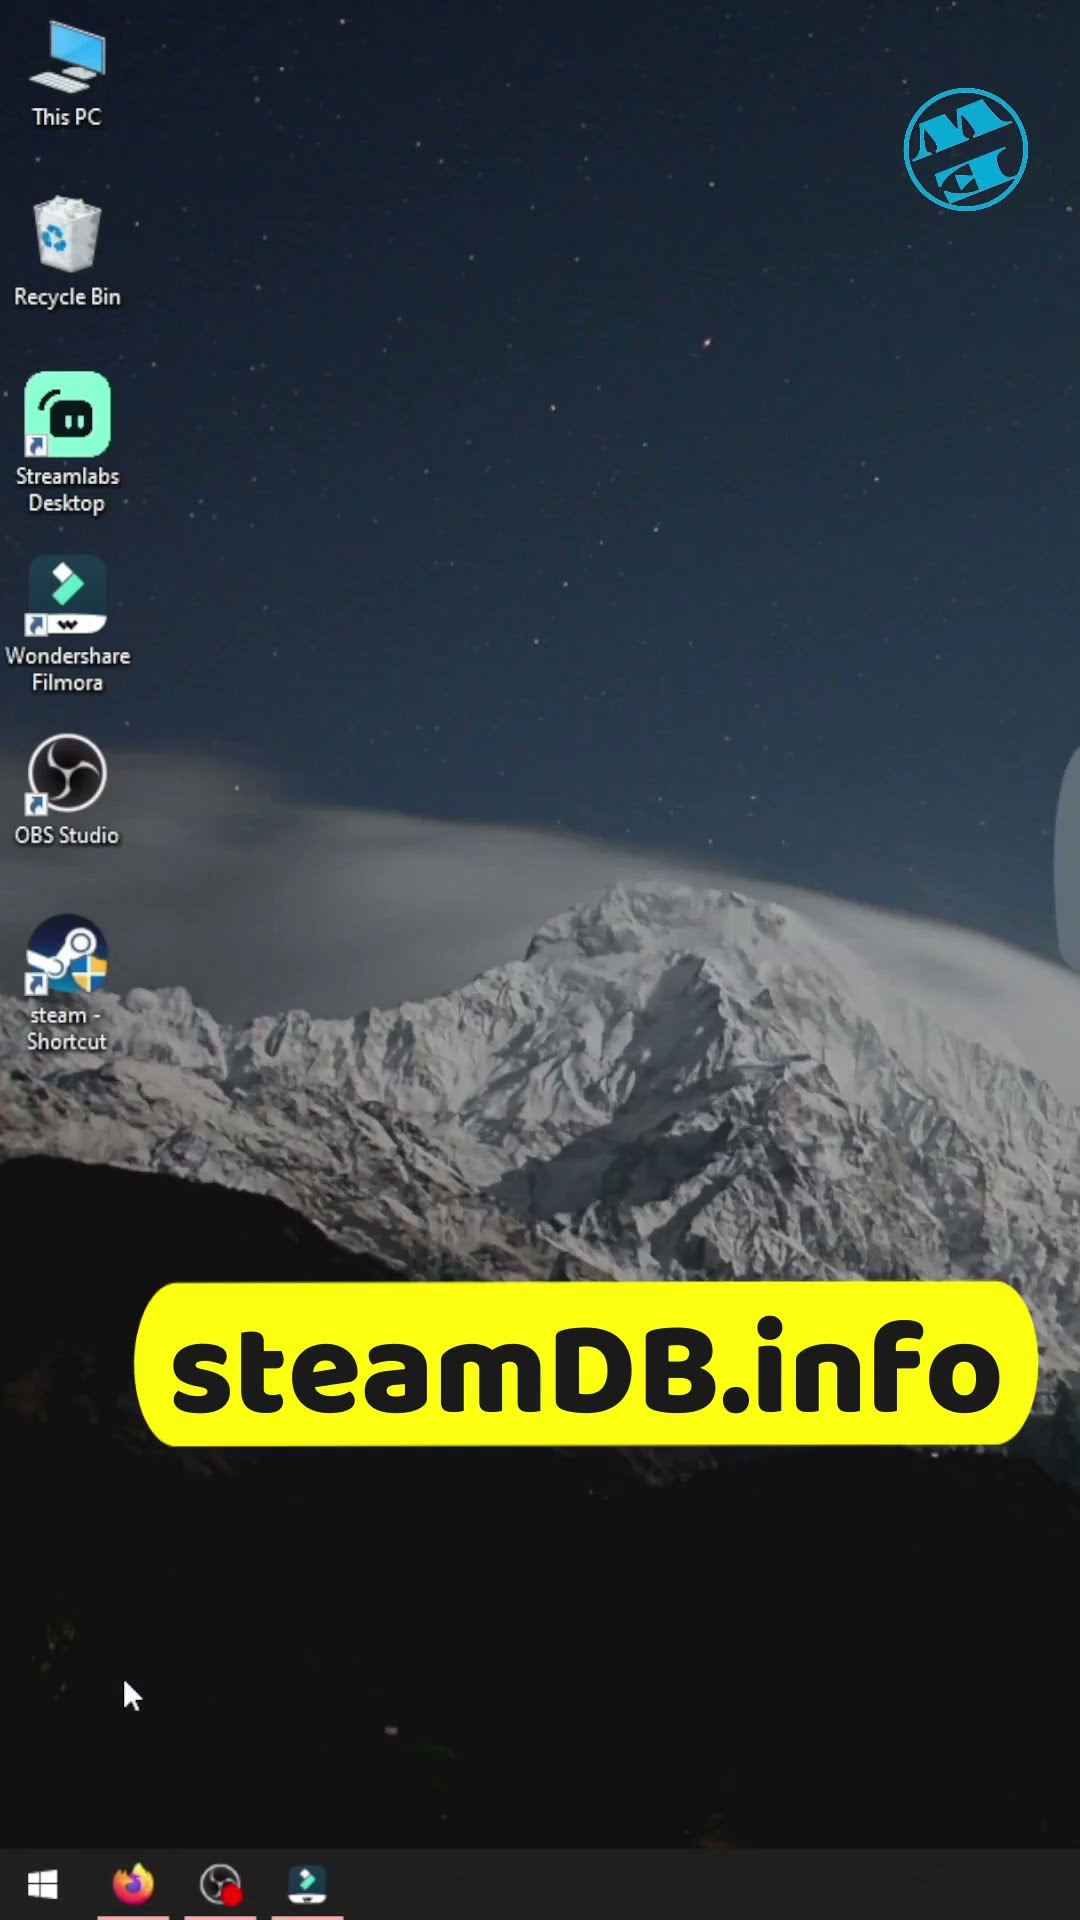 How to Get Free Steam Games